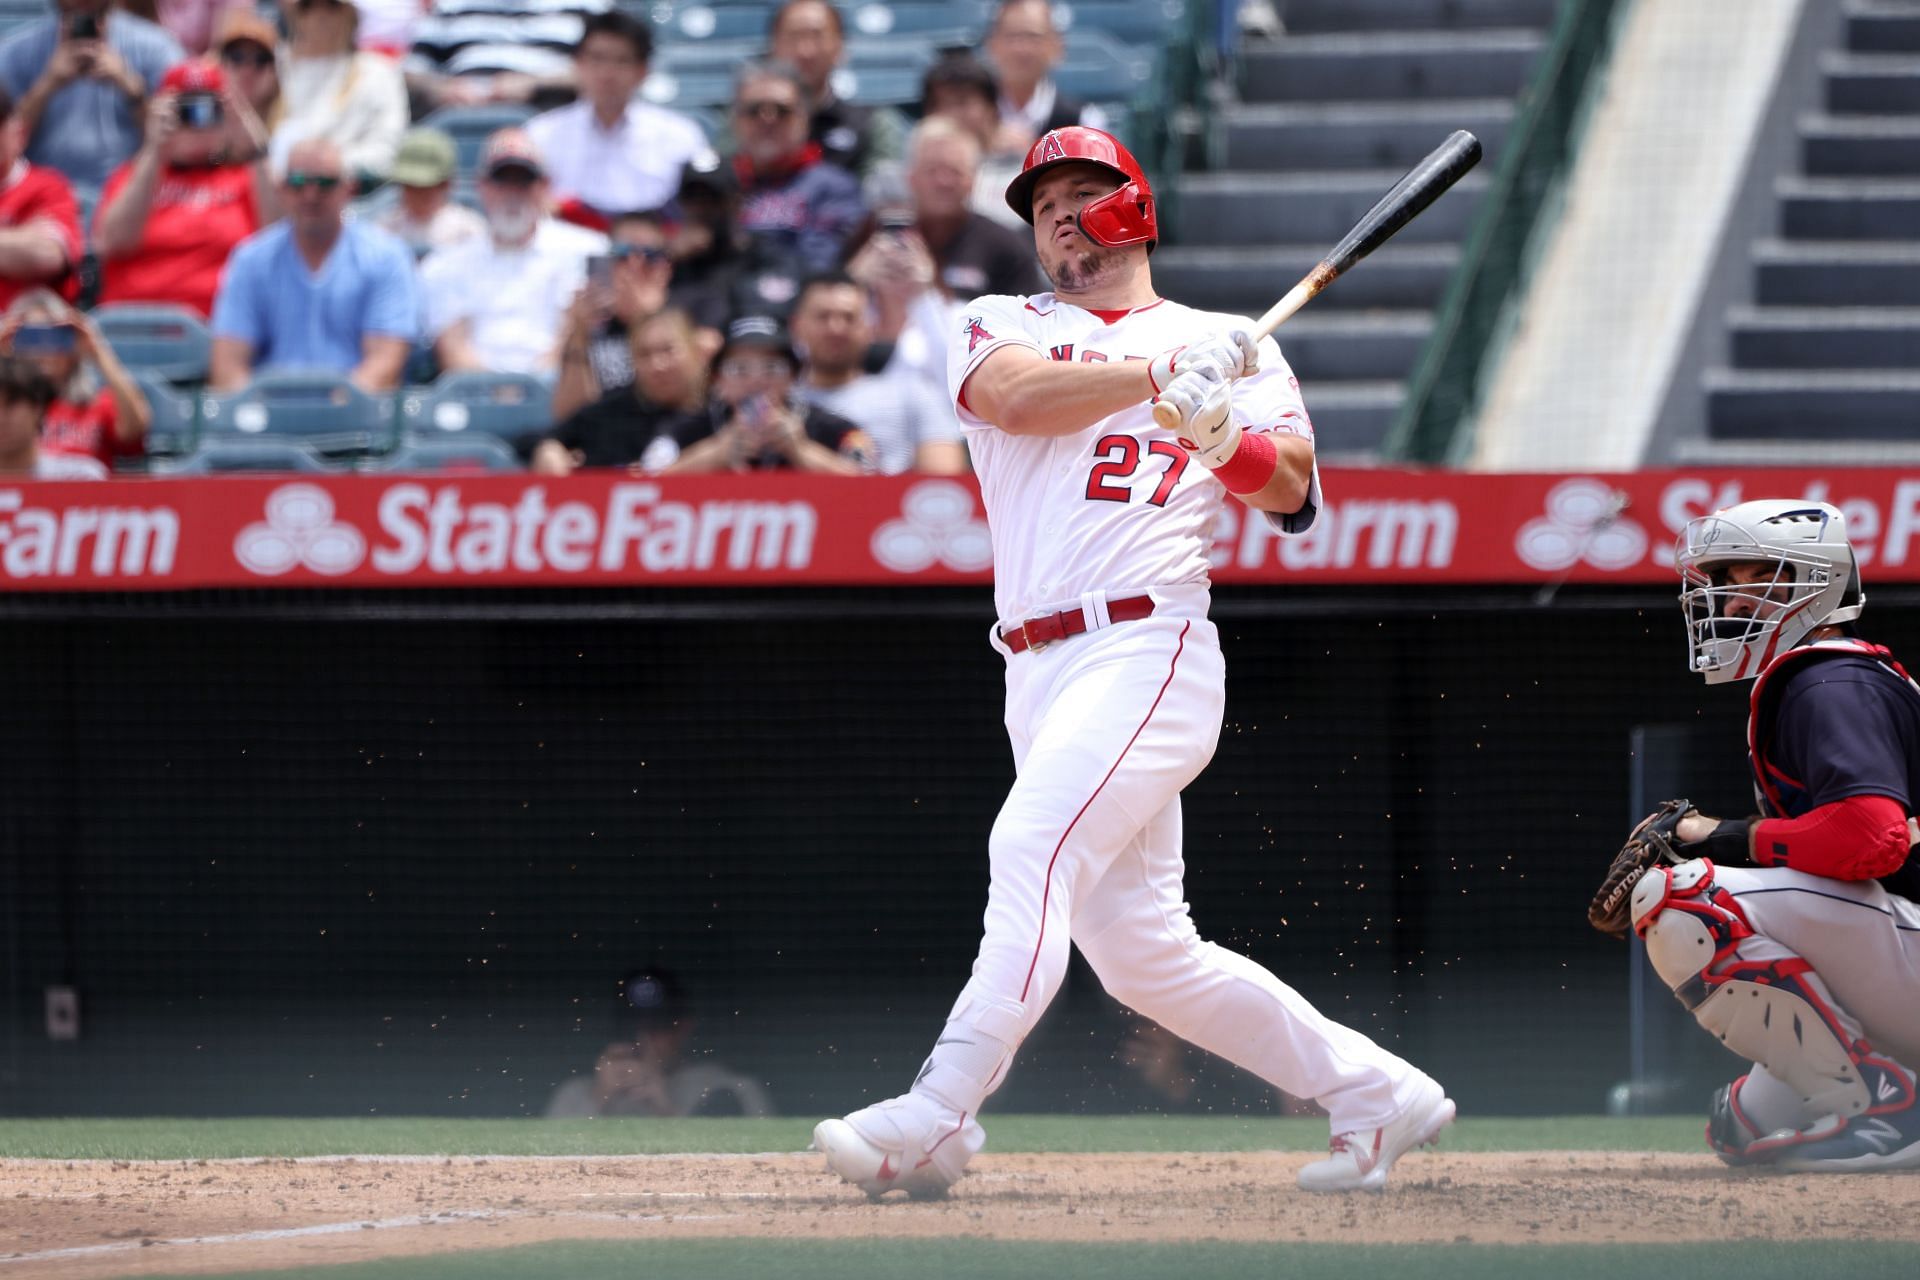 Mike Trout rips a ball down the left field line during a Cleveland Guardians v Los Angeles Angels game.